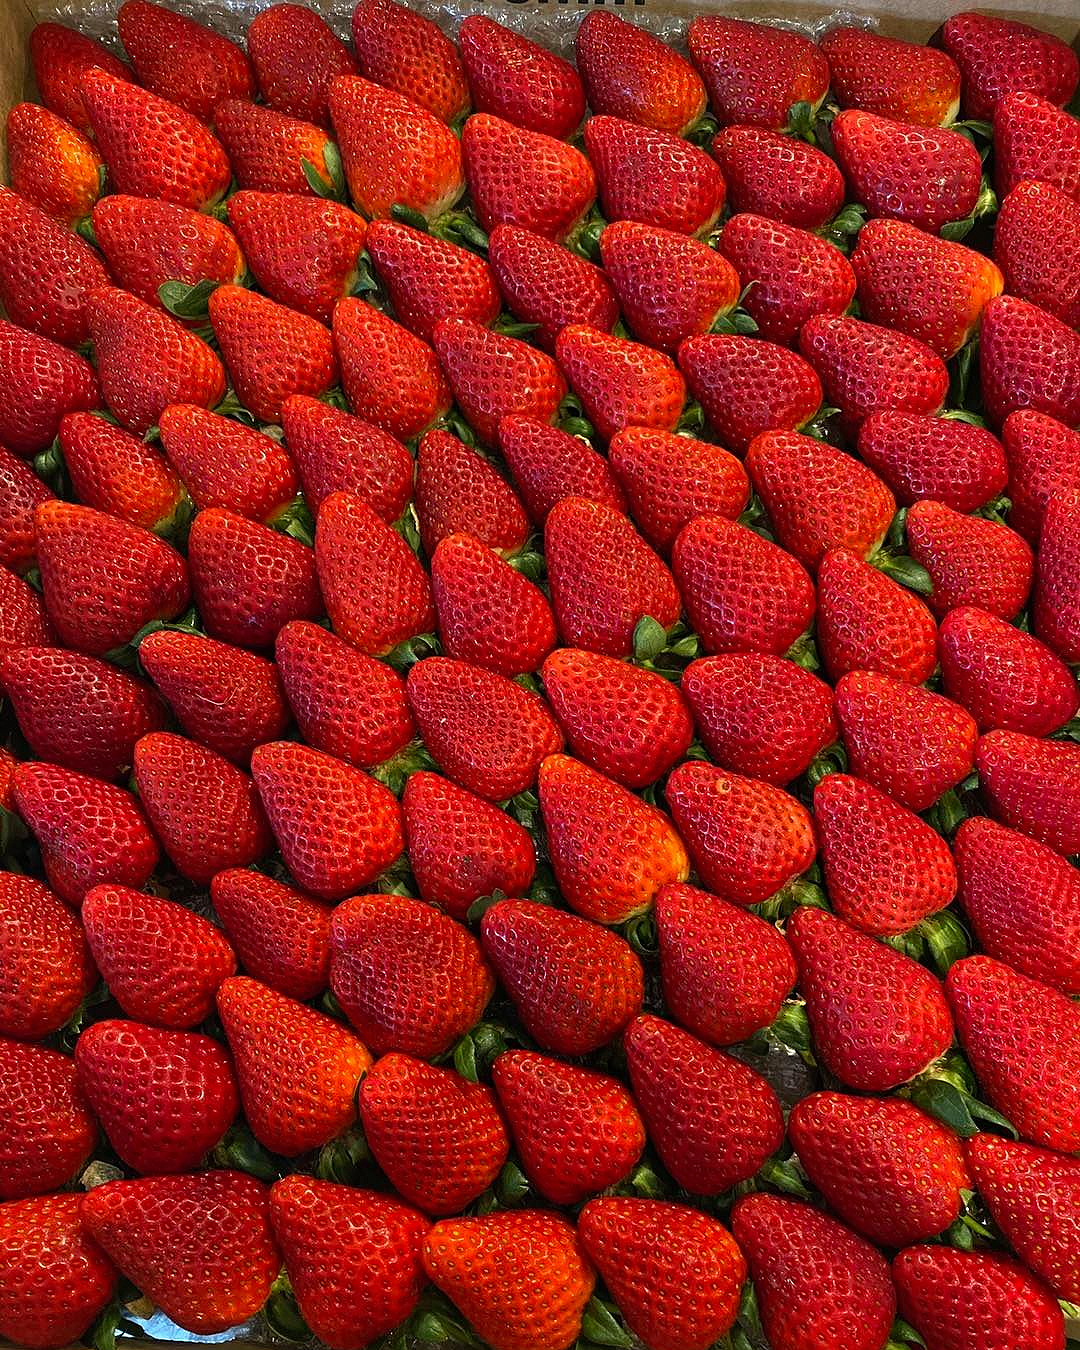 Strawberries upon strawberries at Bell's Berries, one of the best places for strawberry picking in Auckland.